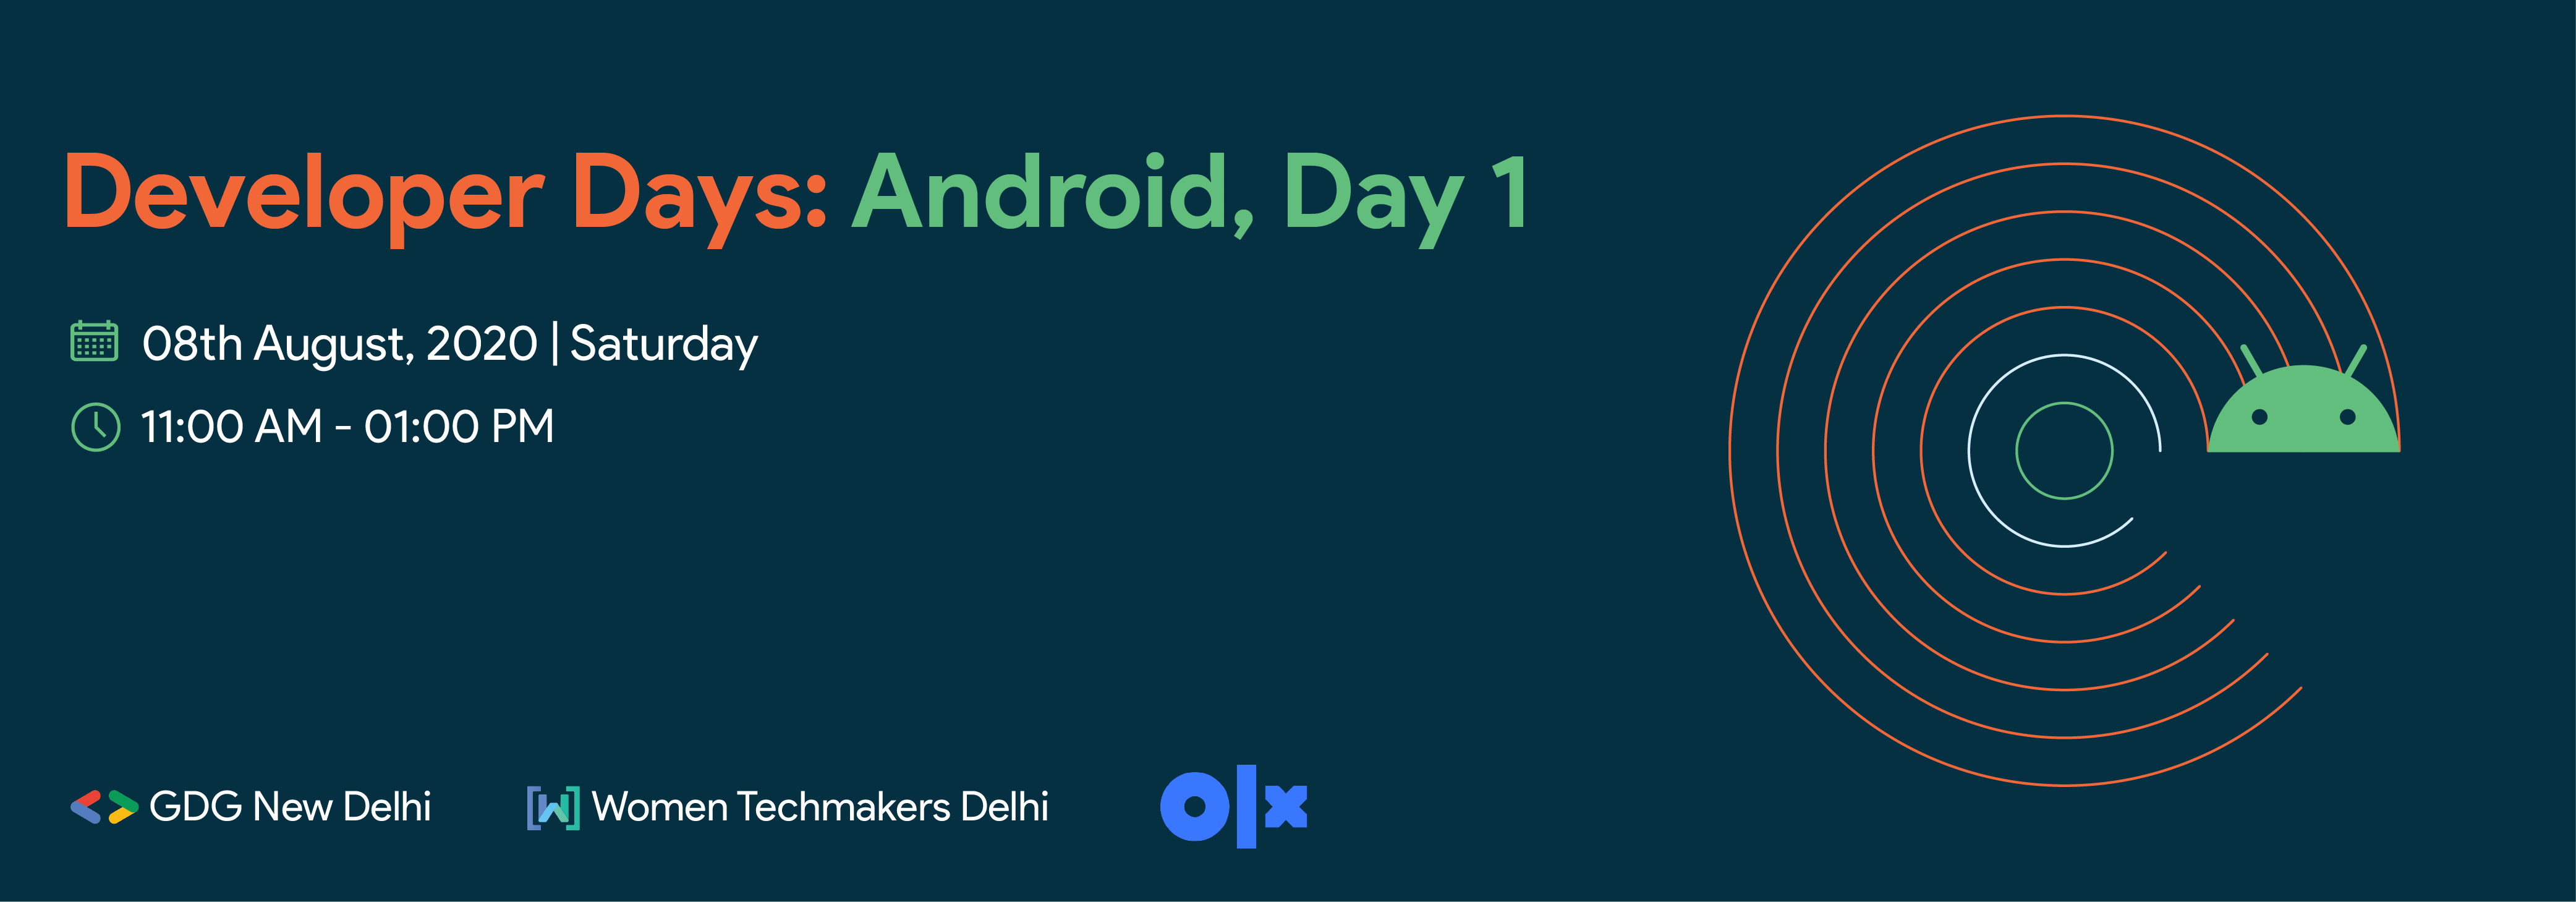 Developer Days: Android, Day 1